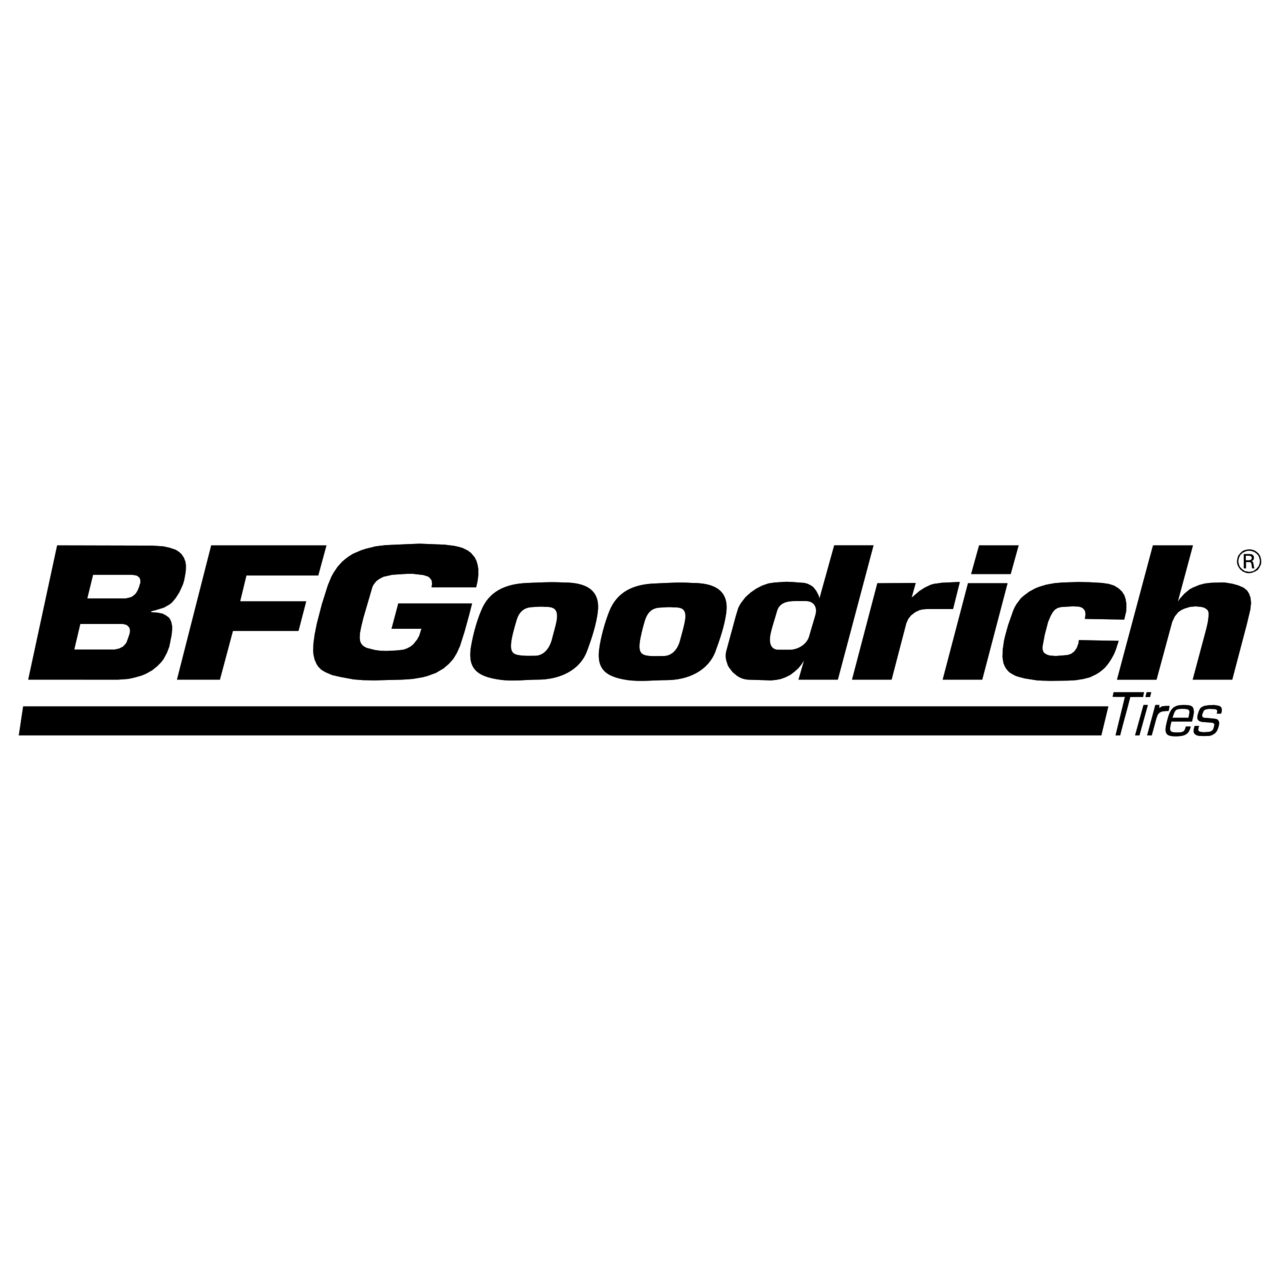 bf-goodrich-logo-black-and-white.png